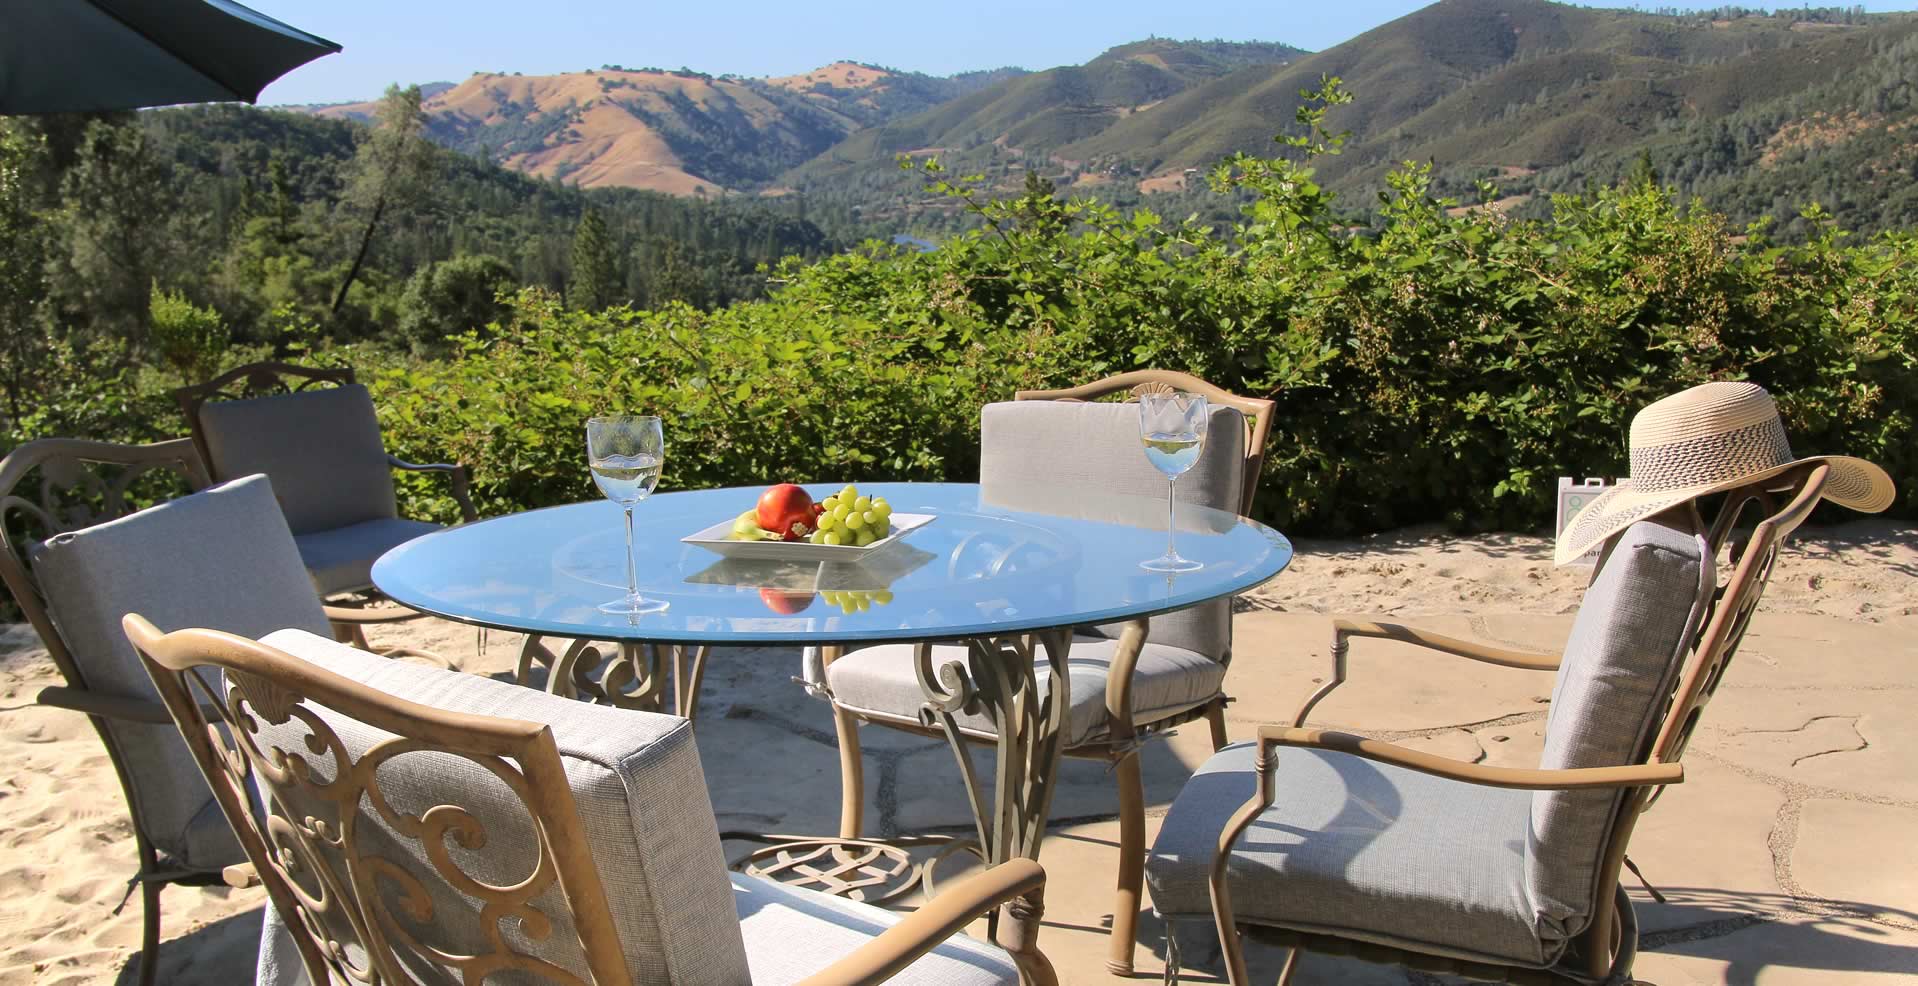 Breakfast table on the pool patio with mountain views